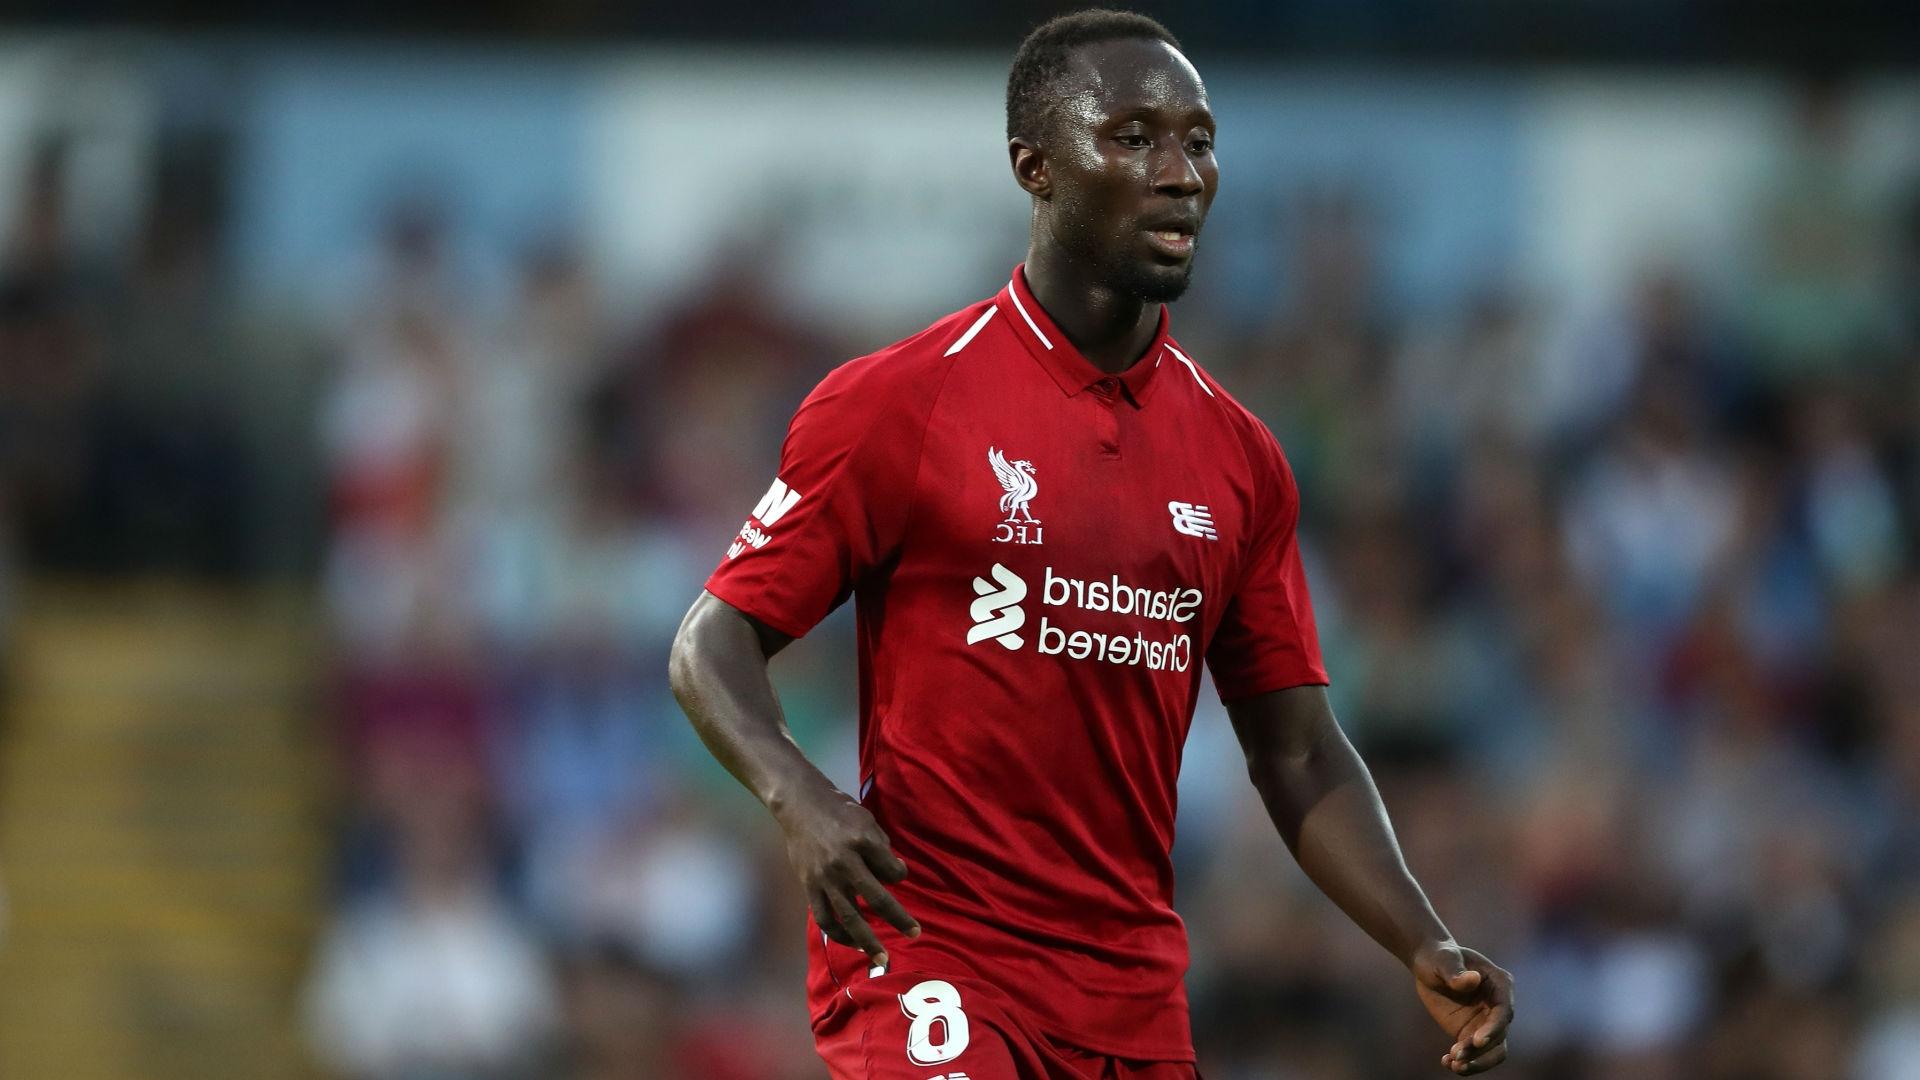 Sport: Liverpool's Naby Keita carried off injured in Guinea match